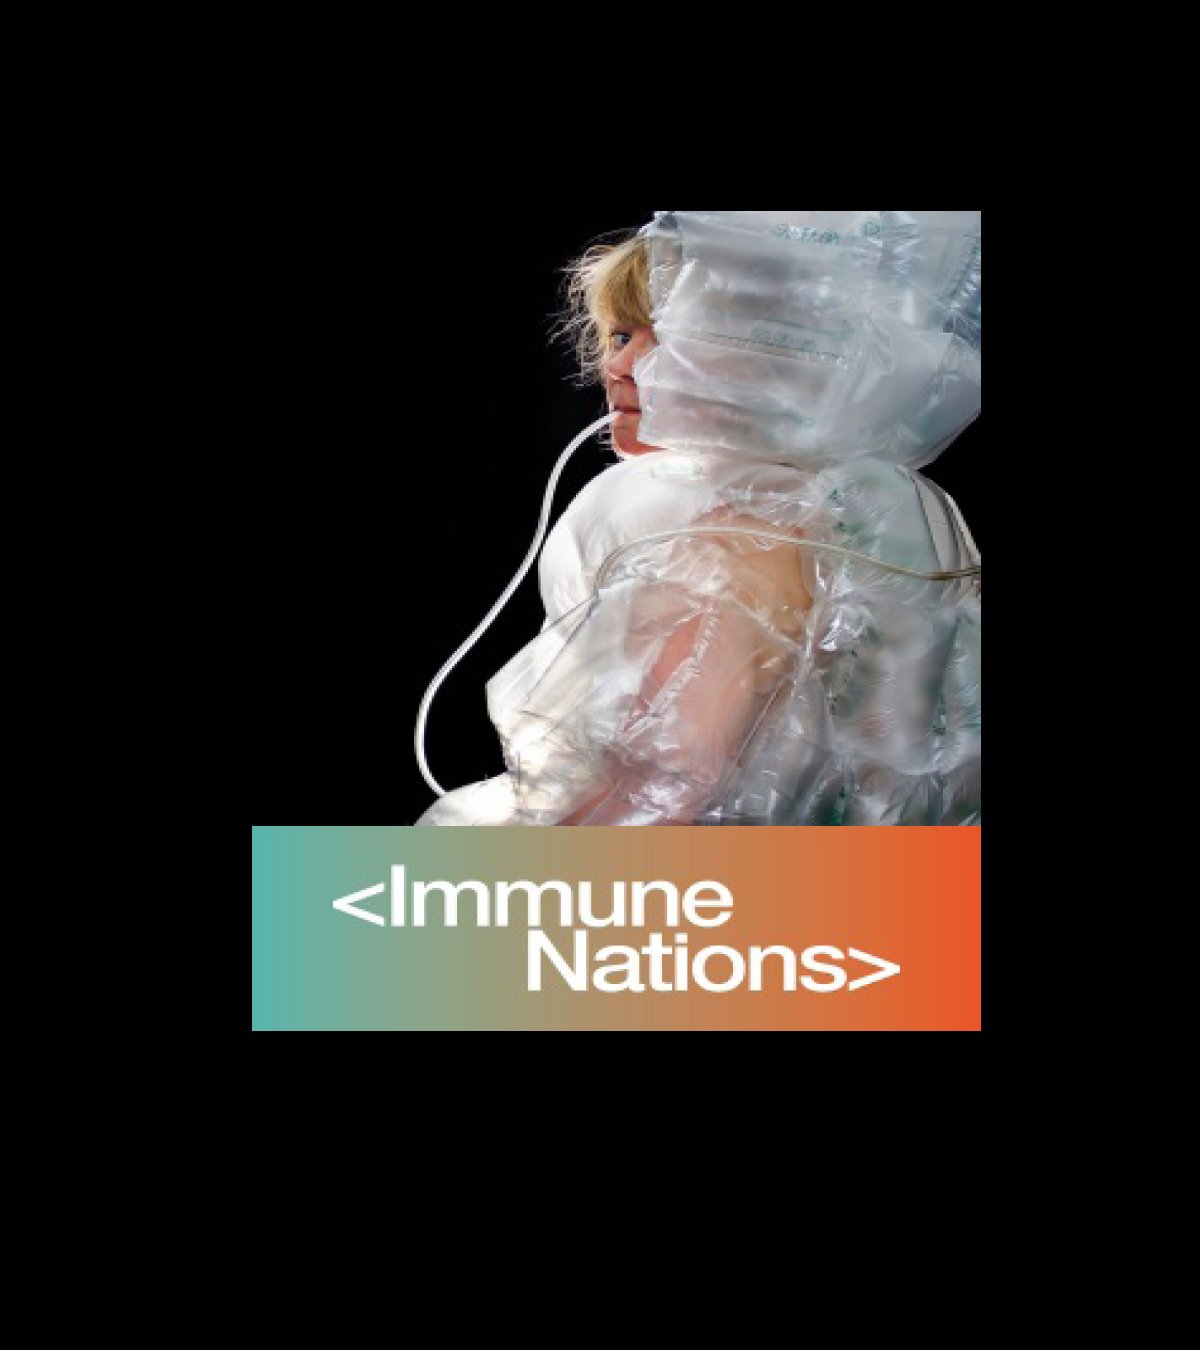 IMMUNE NATIONS catalogue cover on black background